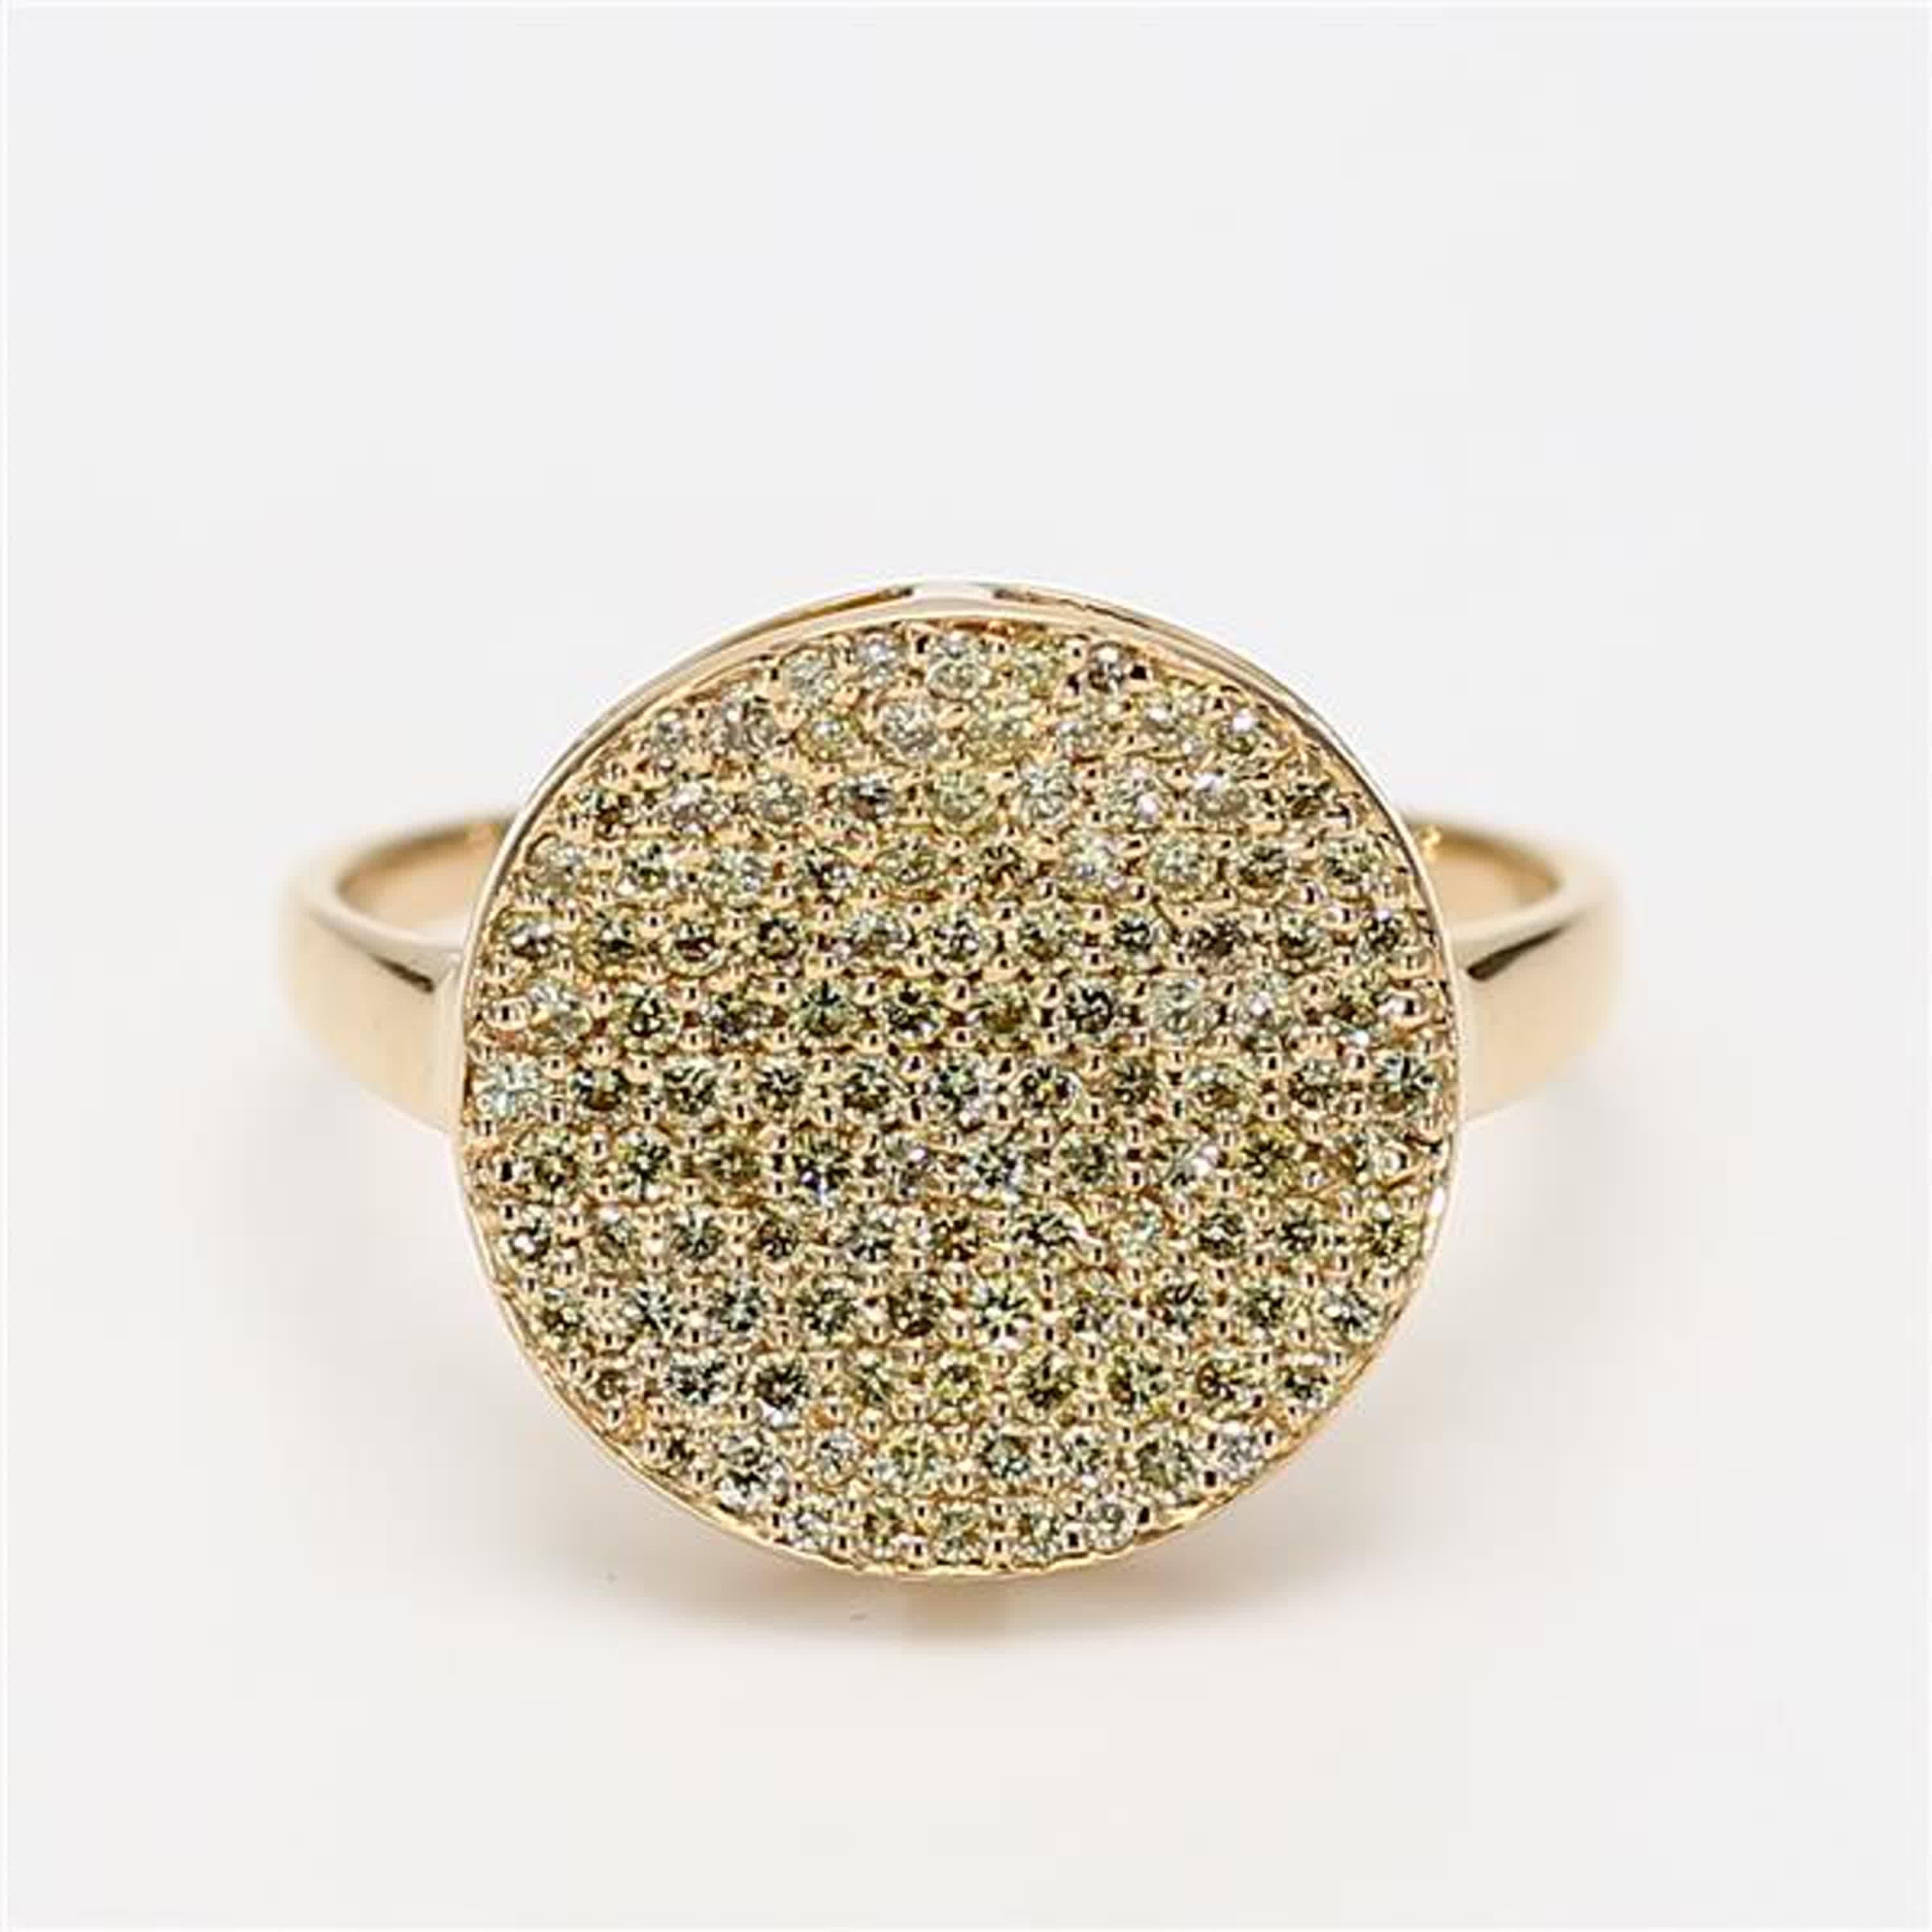 RareGemWorld's classic diamond ring. Mounted in a beautiful 18K Yellow Gold setting with natural round yellow diamond melee. This ring is guaranteed to impress and enhance your personal collection!

Total Weight: .67cts

Natural Round Yellow